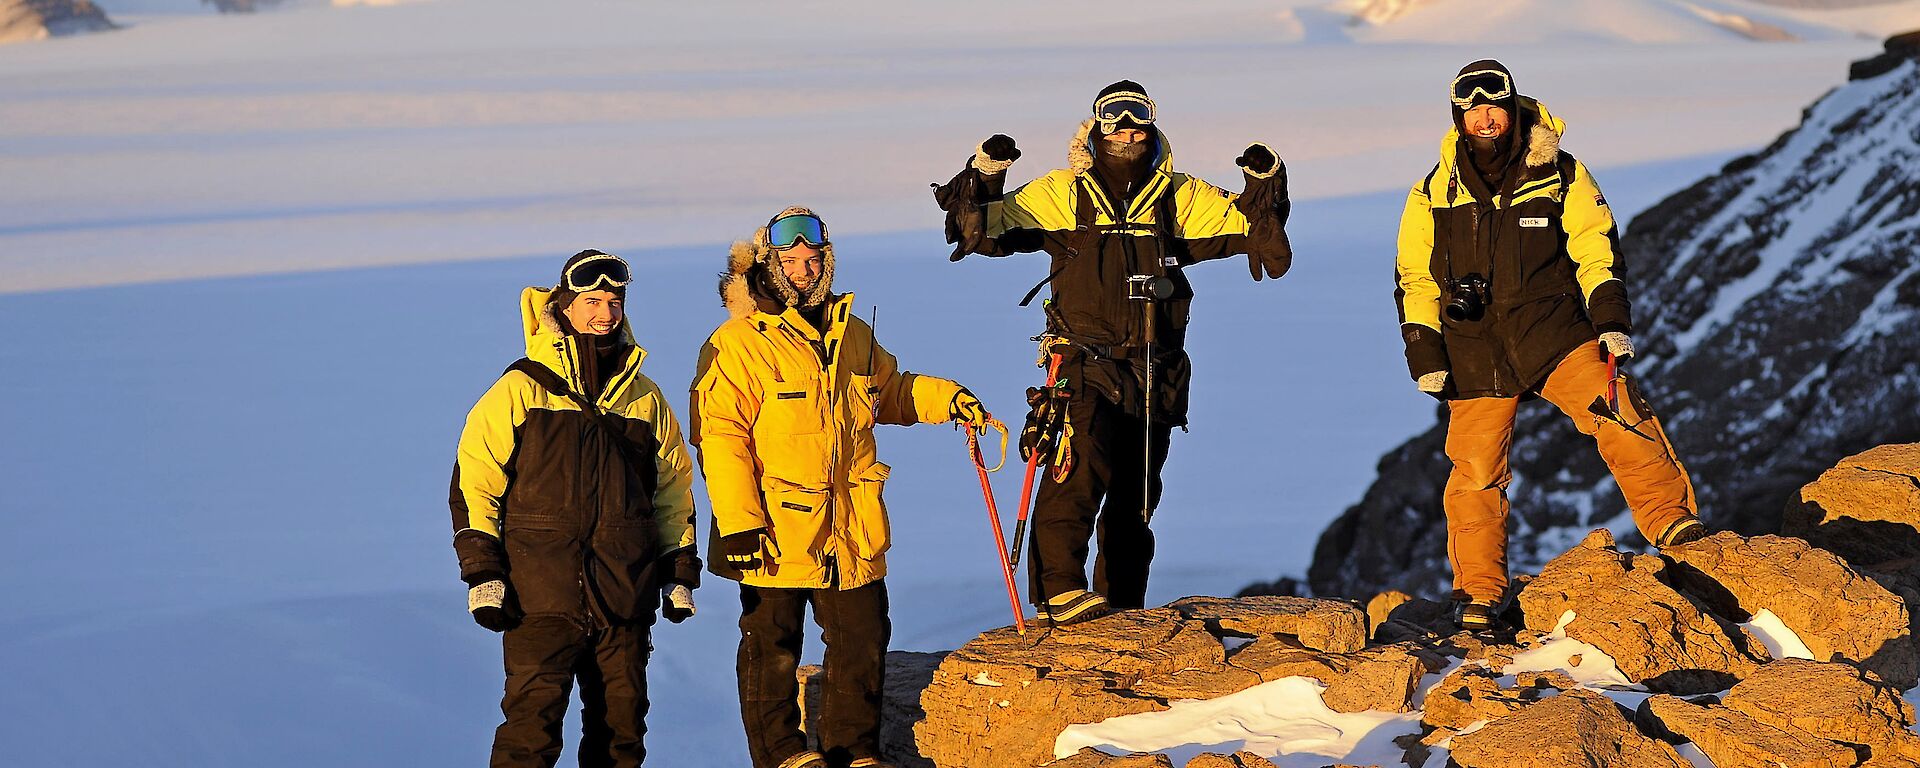 Four expeditioners stand on a rocky mountain surface with the ice plateau behind